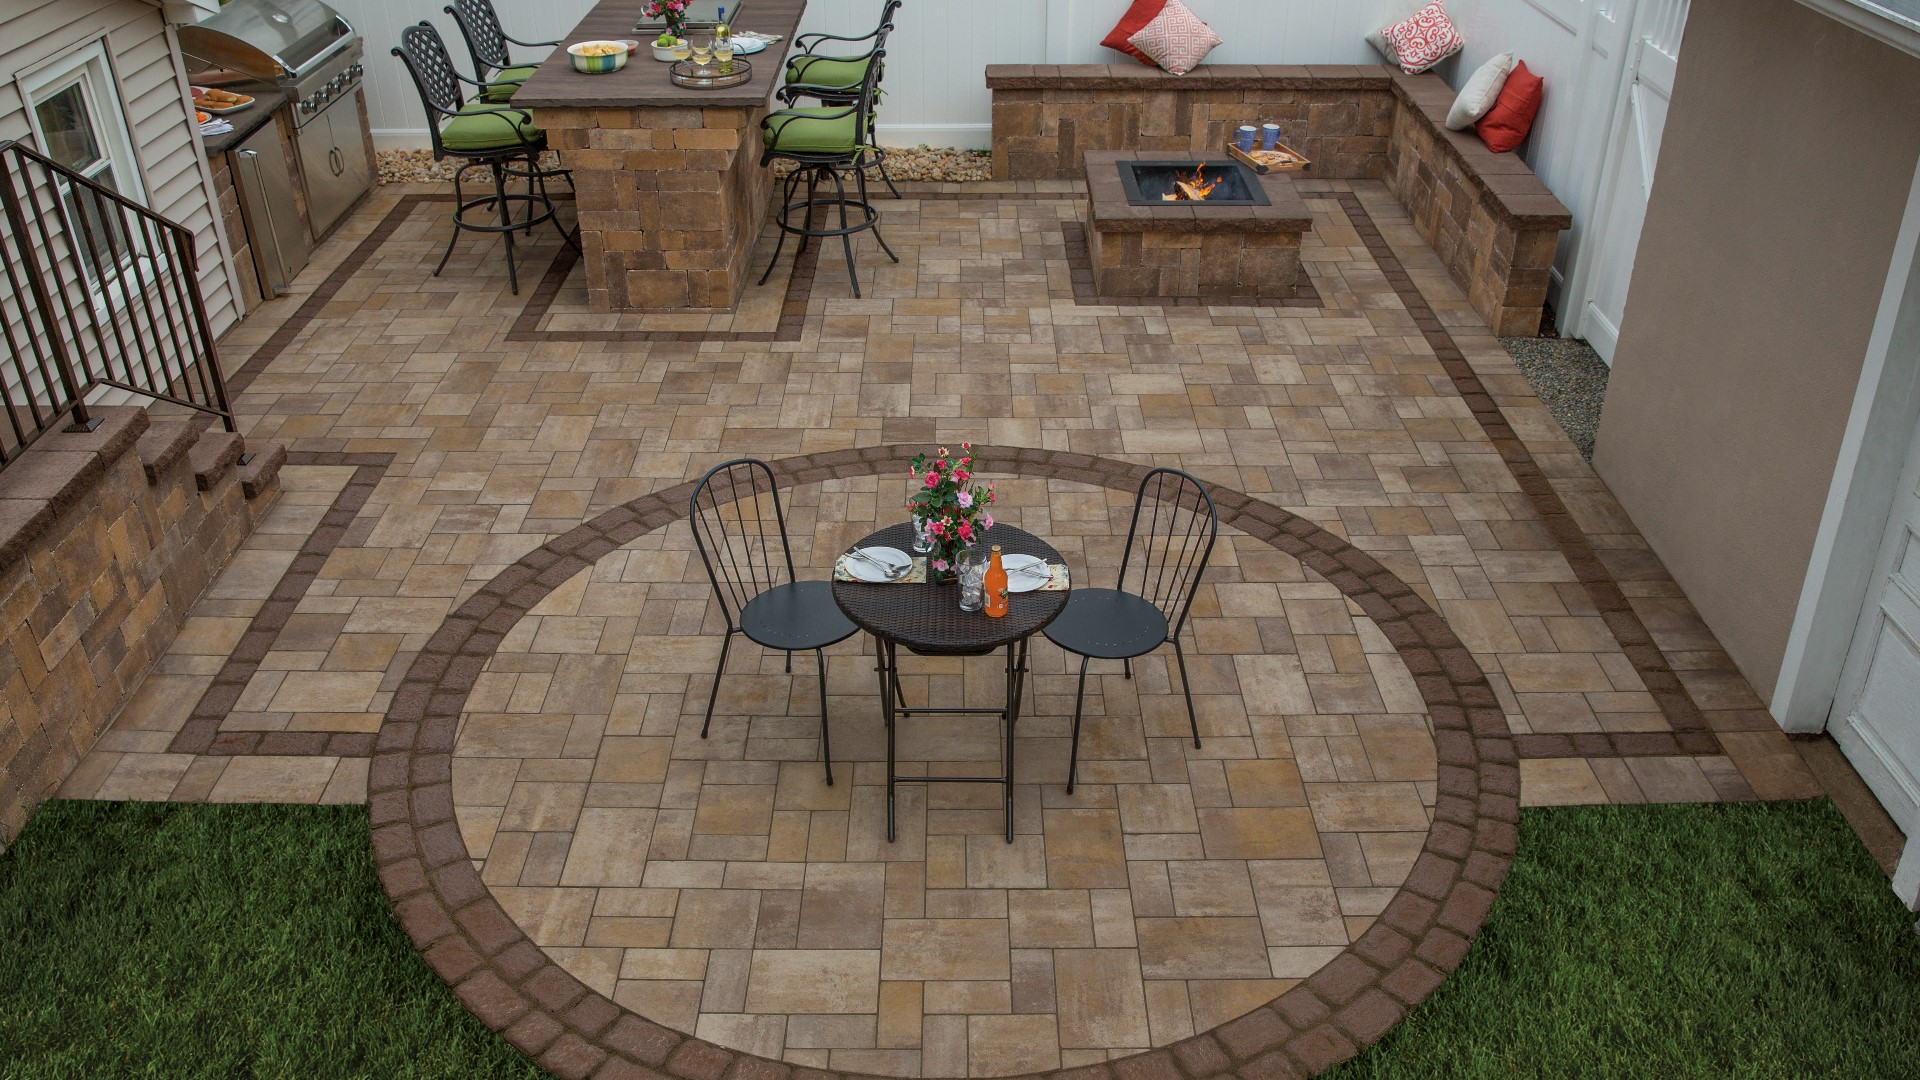 Sponsored by Cambridge Pavers. Create the perfect outdoor space to enjoy the beautiful fall weather. Visit Cambridgepavers.com to locate a dealer near you.